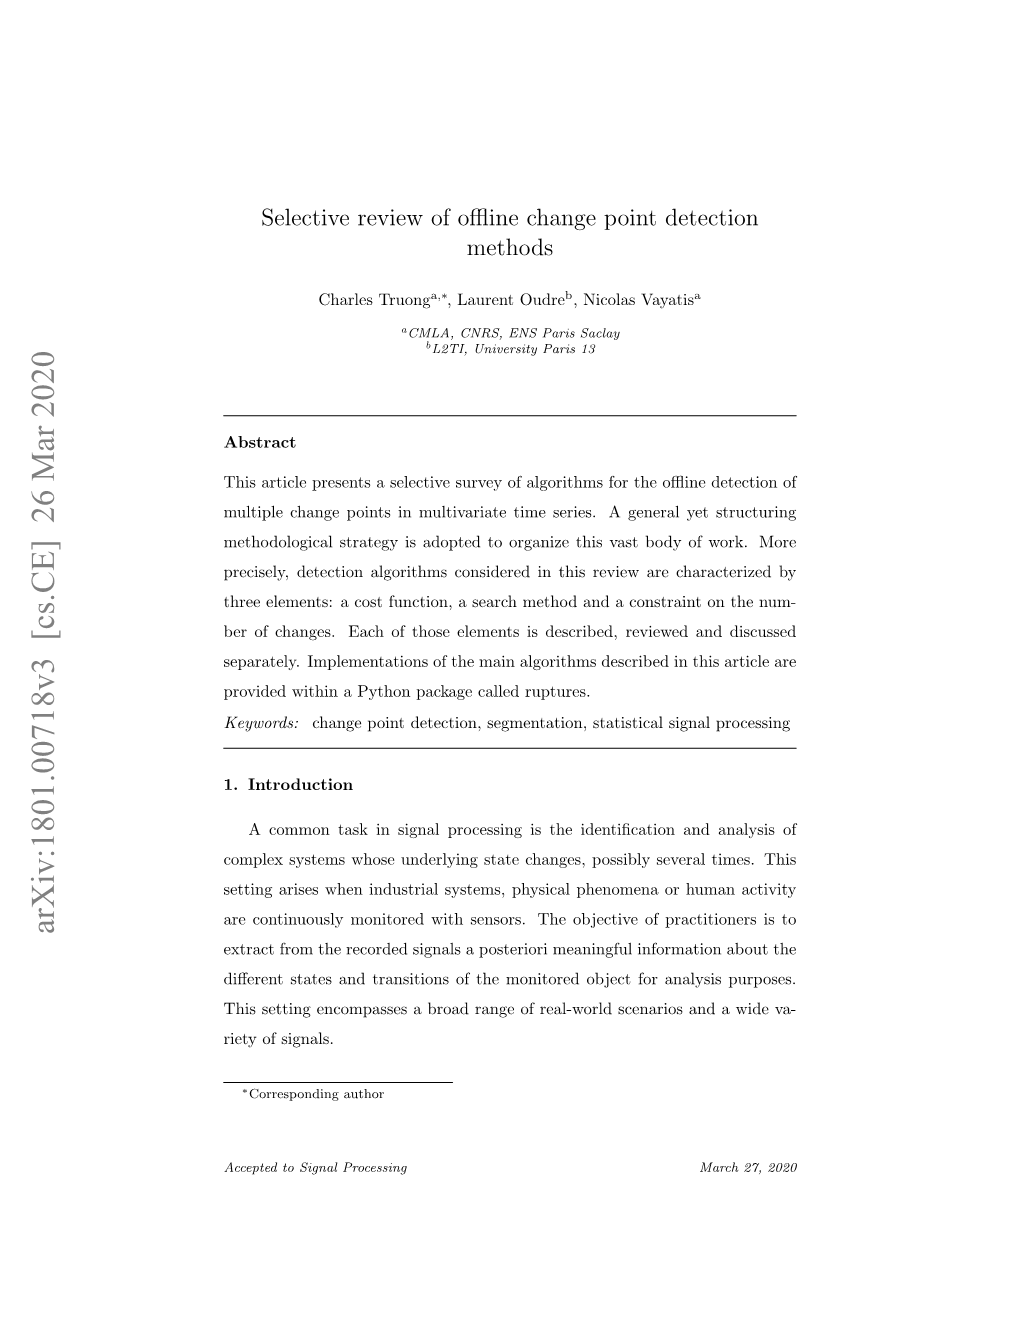 Selective Review of Offline Change Point Detection Methods